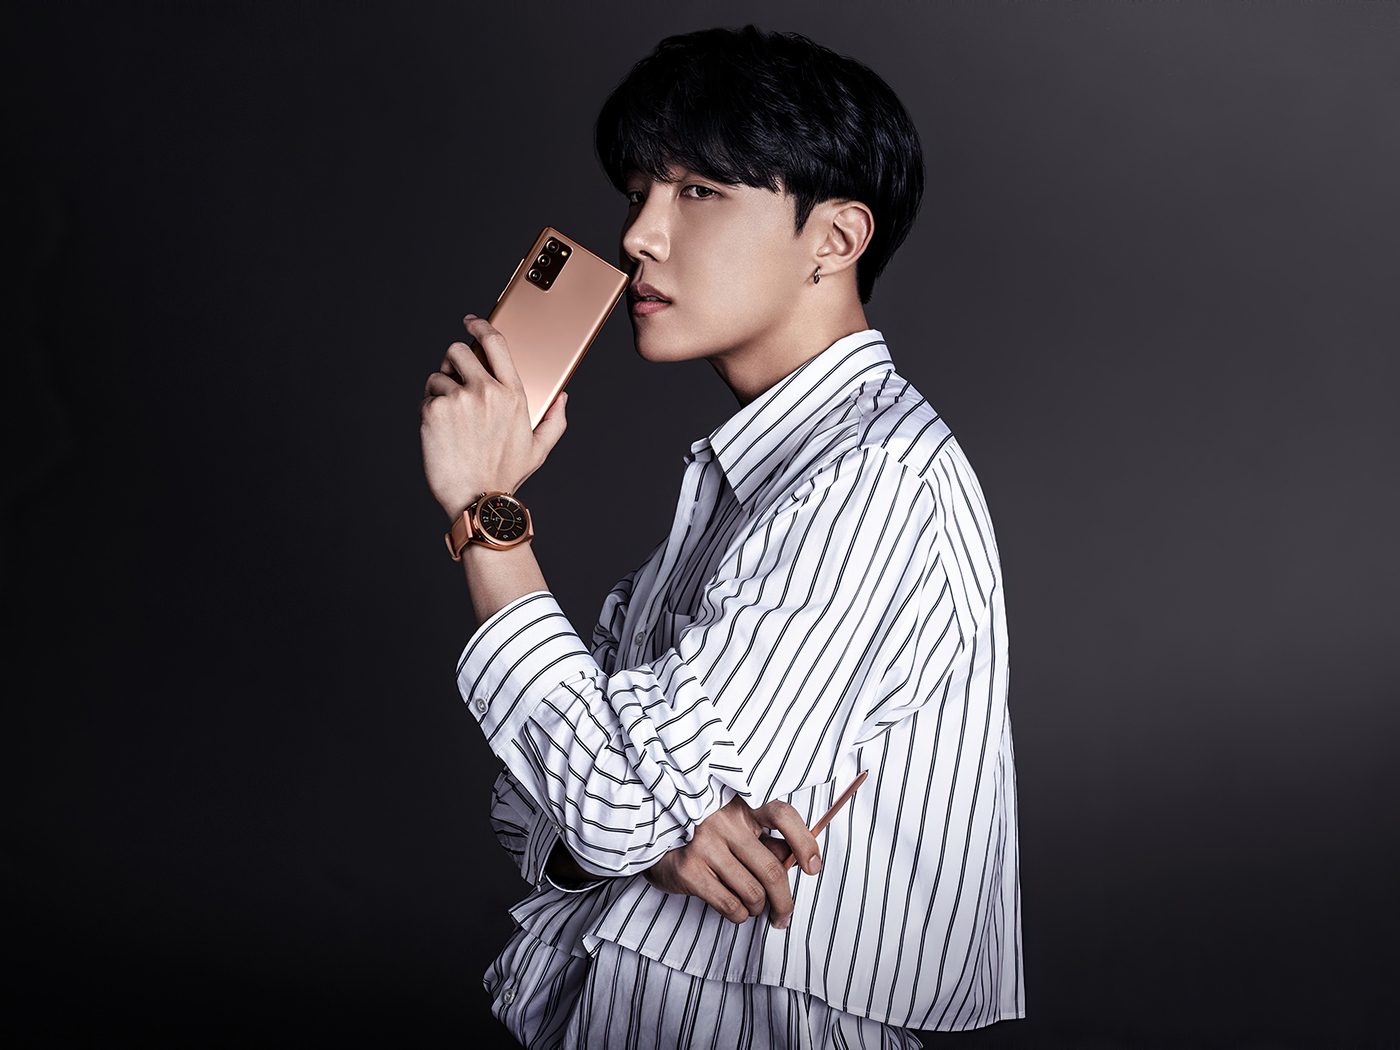 1400x1050 BTS J Hope 1400x1050 Resolution HD 4k Wallpapers, Images